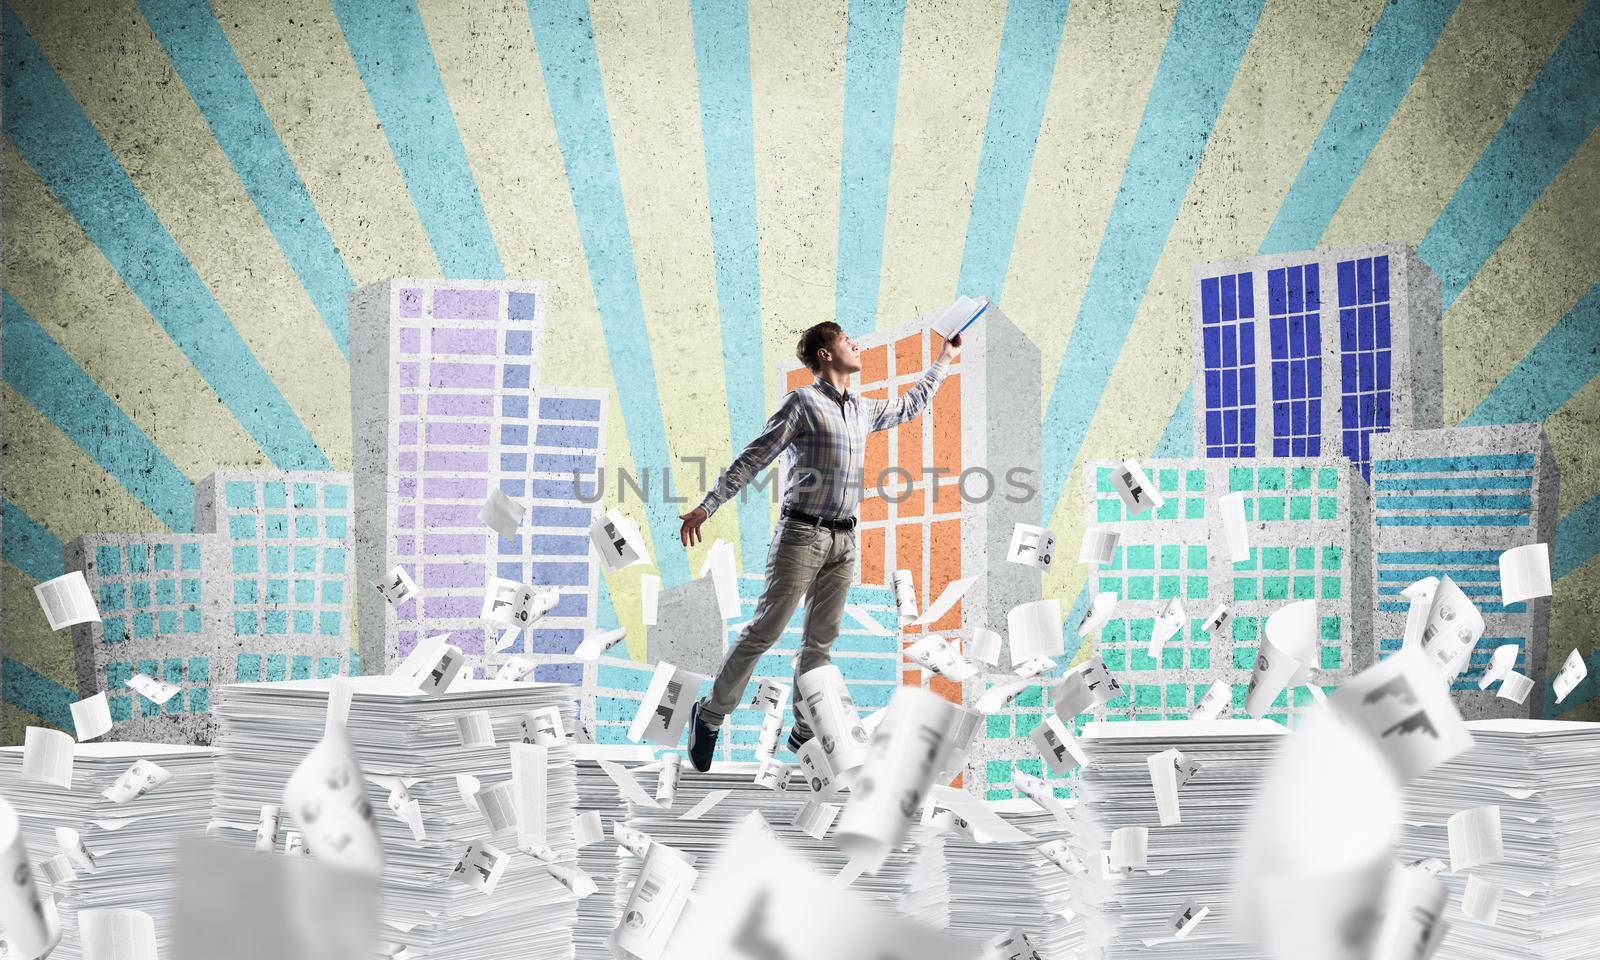 Man in casual wear keeping hand with book up while standing among flying papers with drawn cityscape on background. Mixed media.